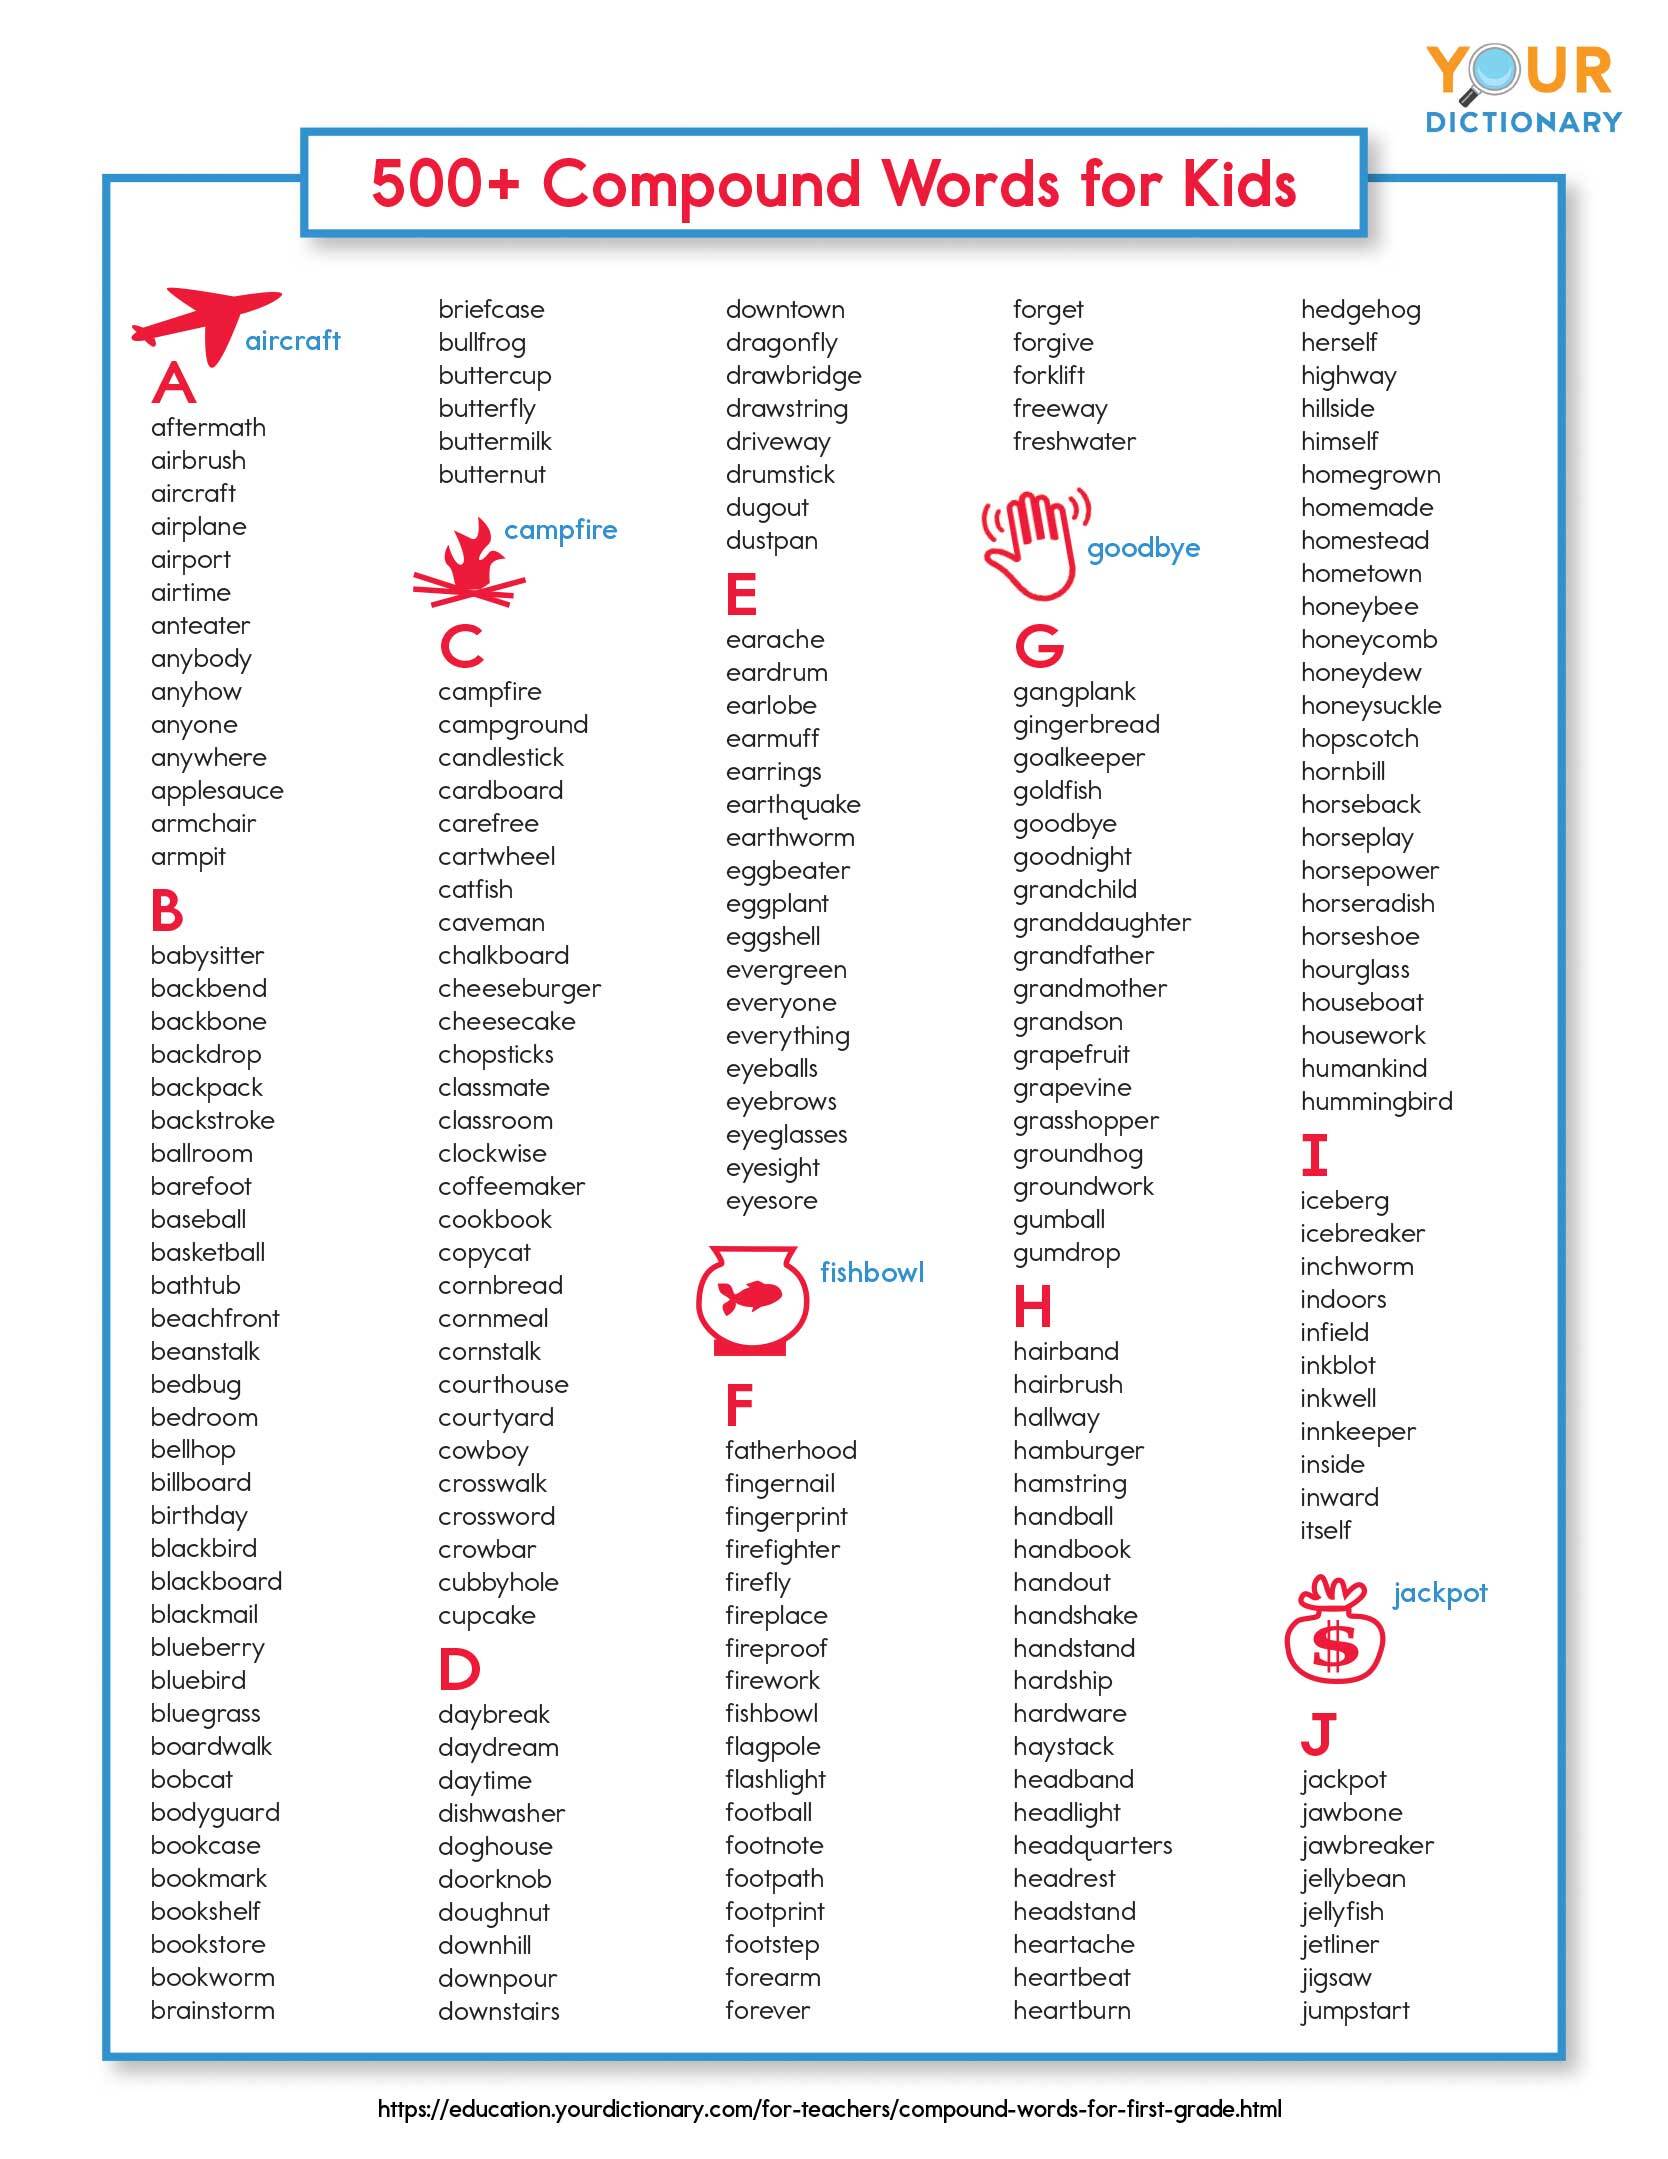 500+ Compound Words for Kids